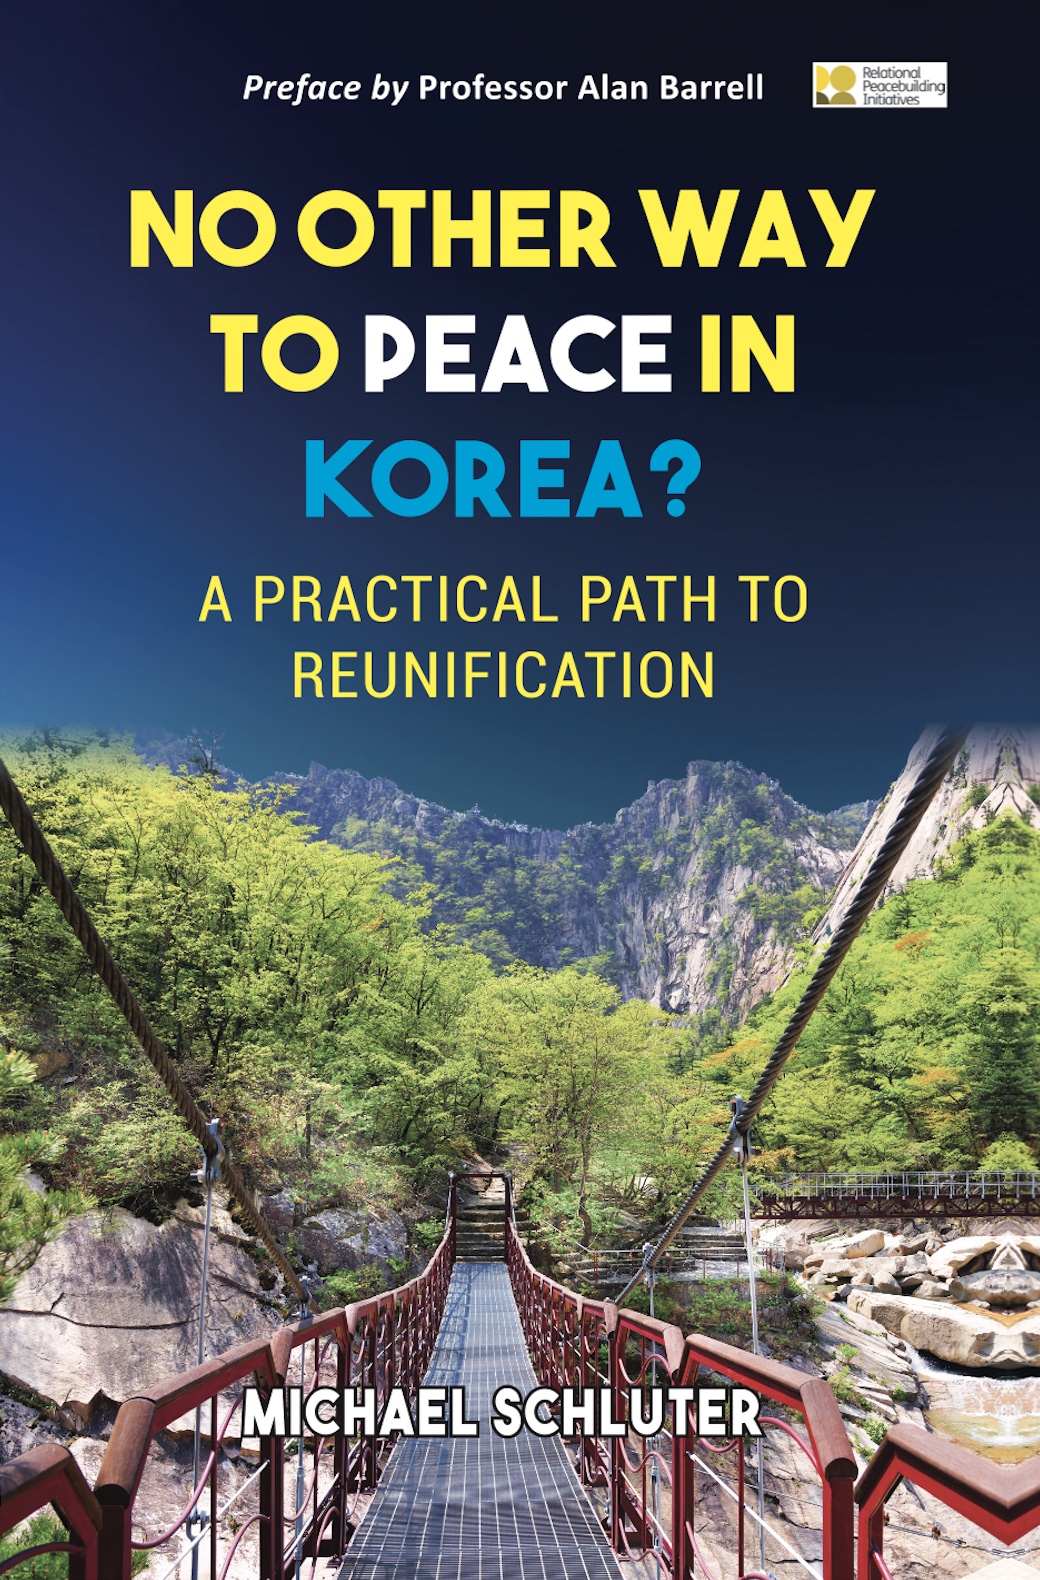 No Other Way to Peace in Korea? A Practical Path to Reunification